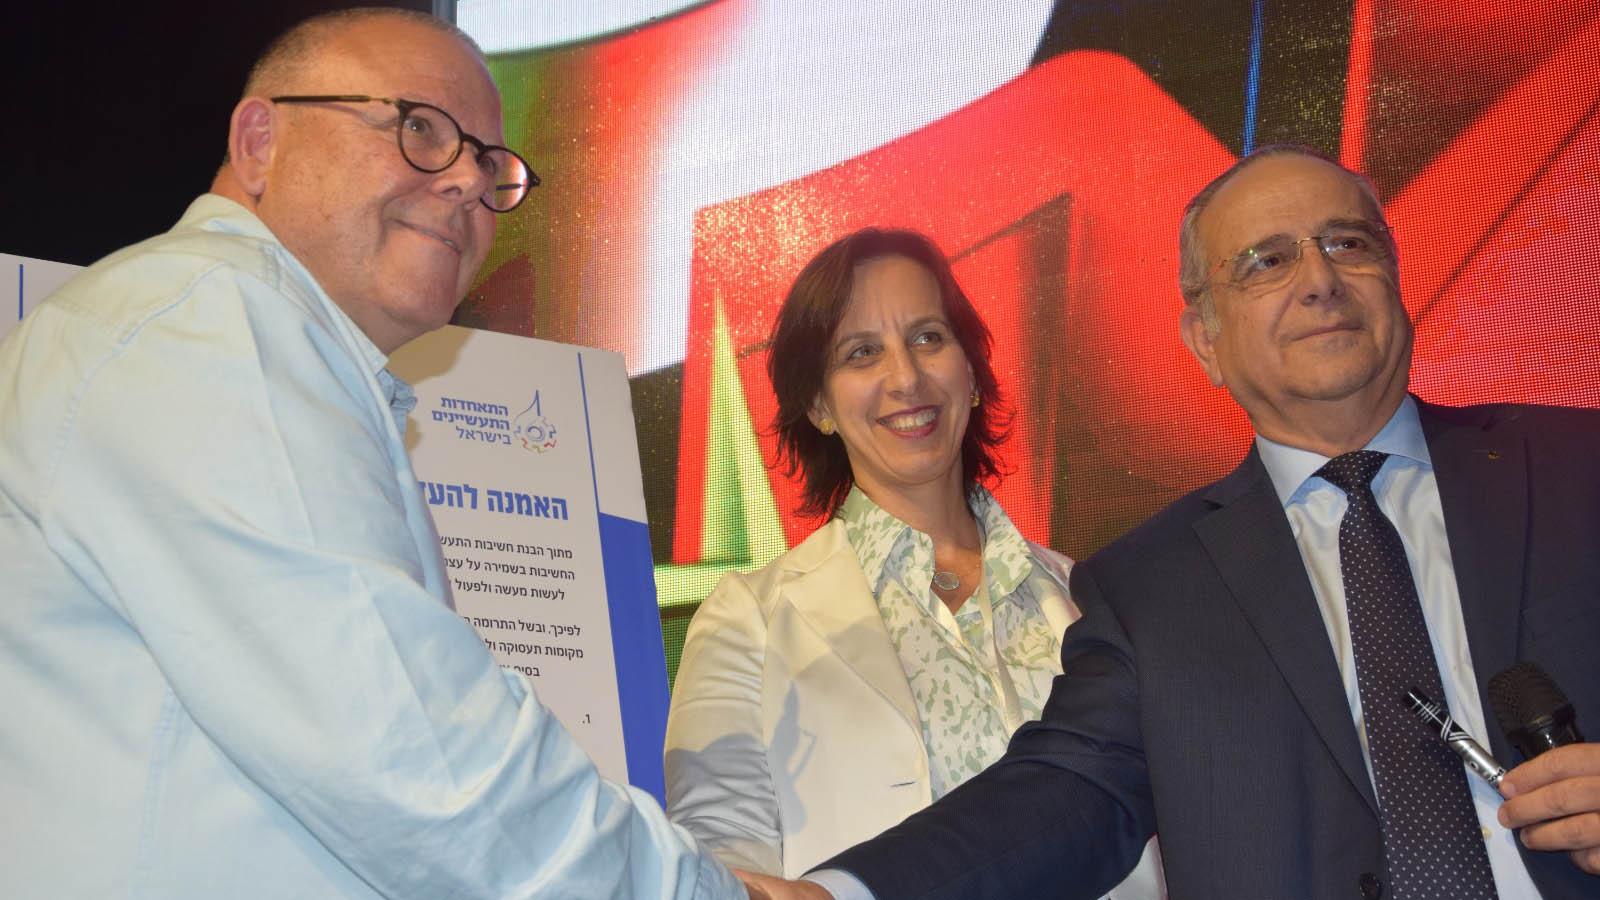 Histadrut Chairperson Arnon Bar-David and Shraga Brosh, outgoing chairman of the Manufacturer's Association at the Israeli Manufacturing Conference, signing the “Made in Israel” agreement, Dec. 2, 2019 (Photograph: Omer Cohen)